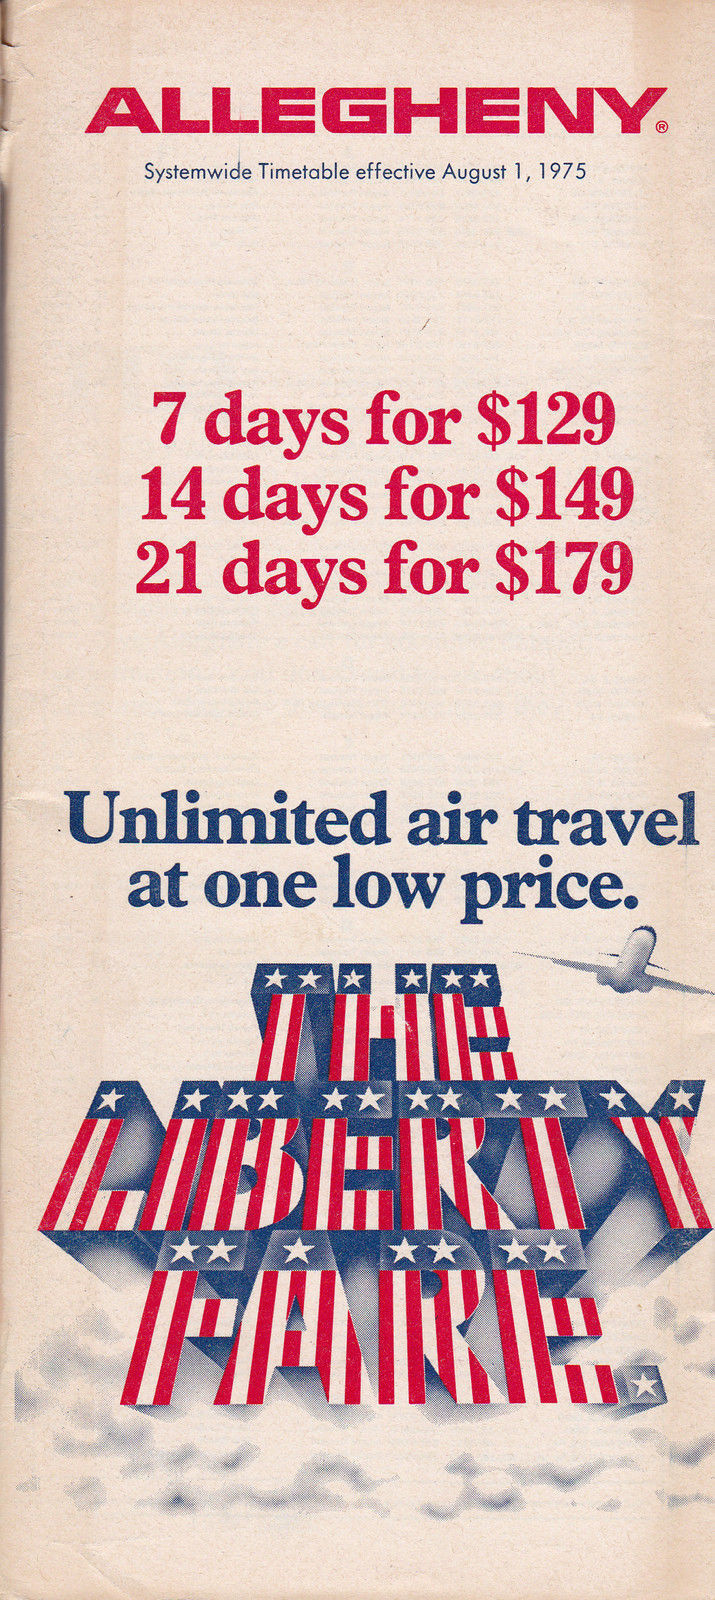 Allegheny Airlines - System Timetable - 1 August 1975